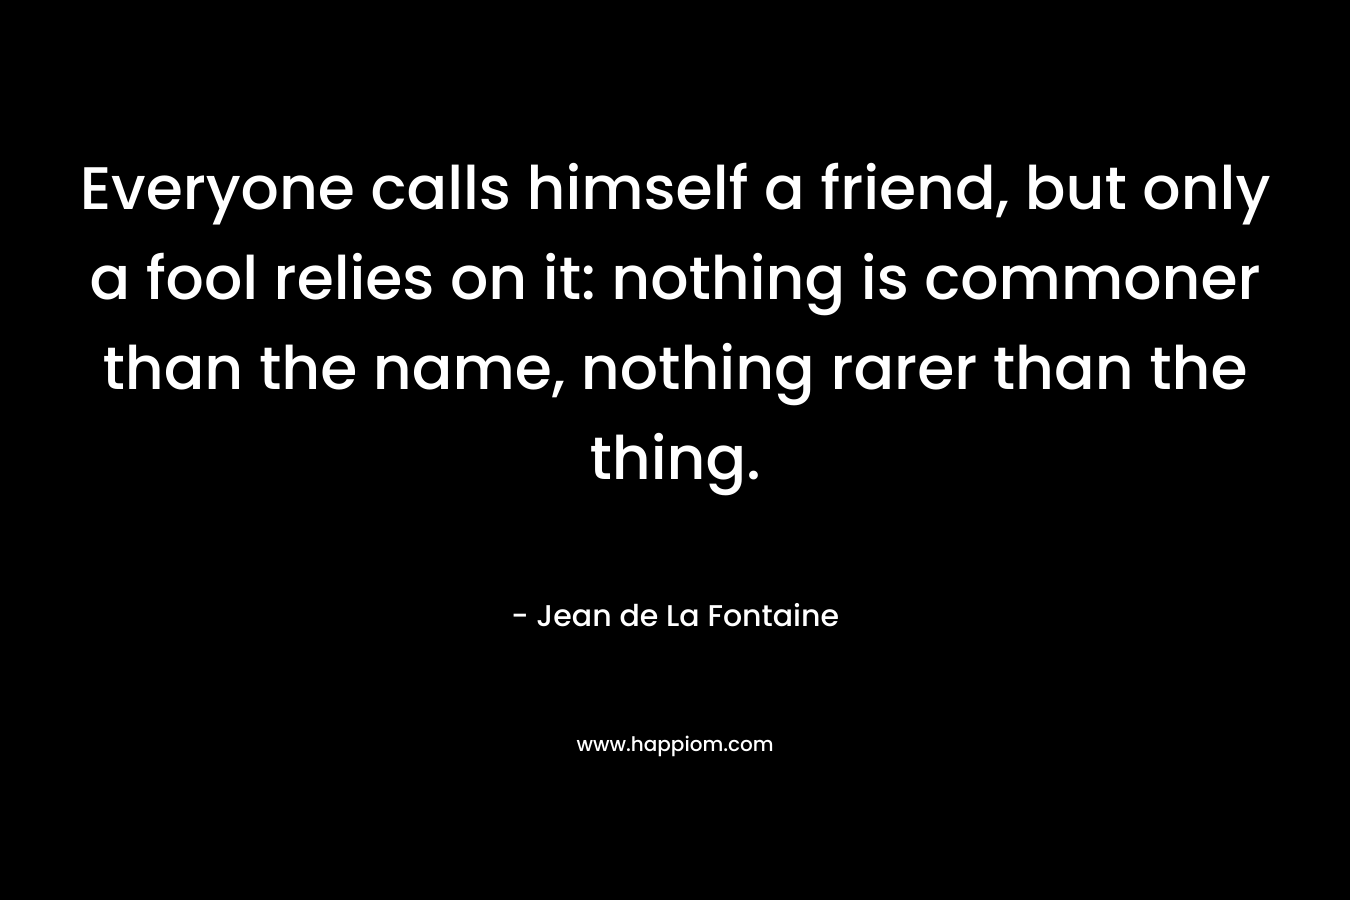 Everyone calls himself a friend, but only a fool relies on it: nothing is commoner than the name, nothing rarer than the thing. – Jean de La Fontaine